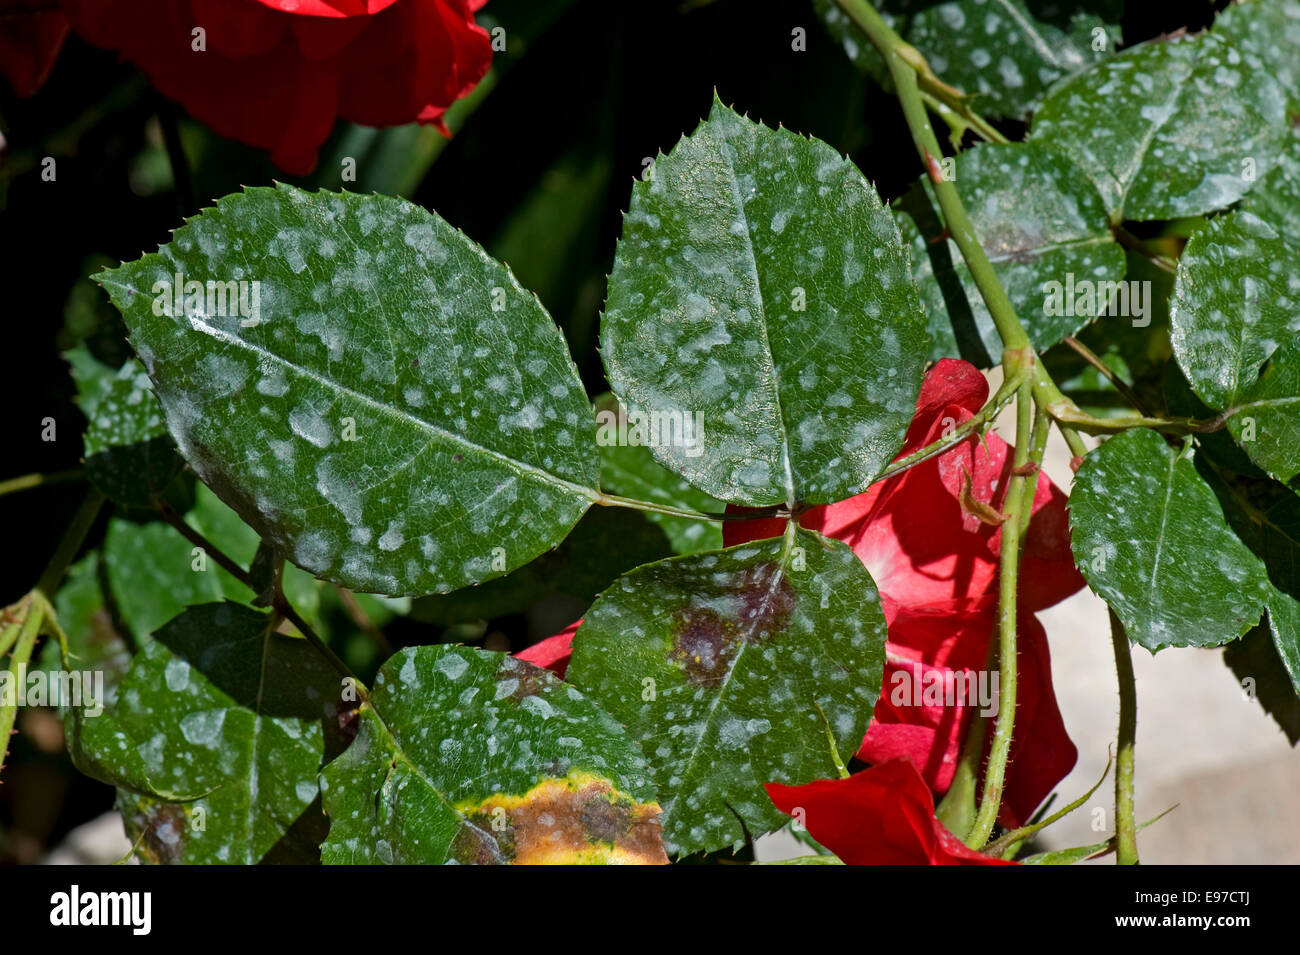 Spray deposit on the leaves of red climbing roses in a garden on the Bay of Naples, Italy Stock Photo